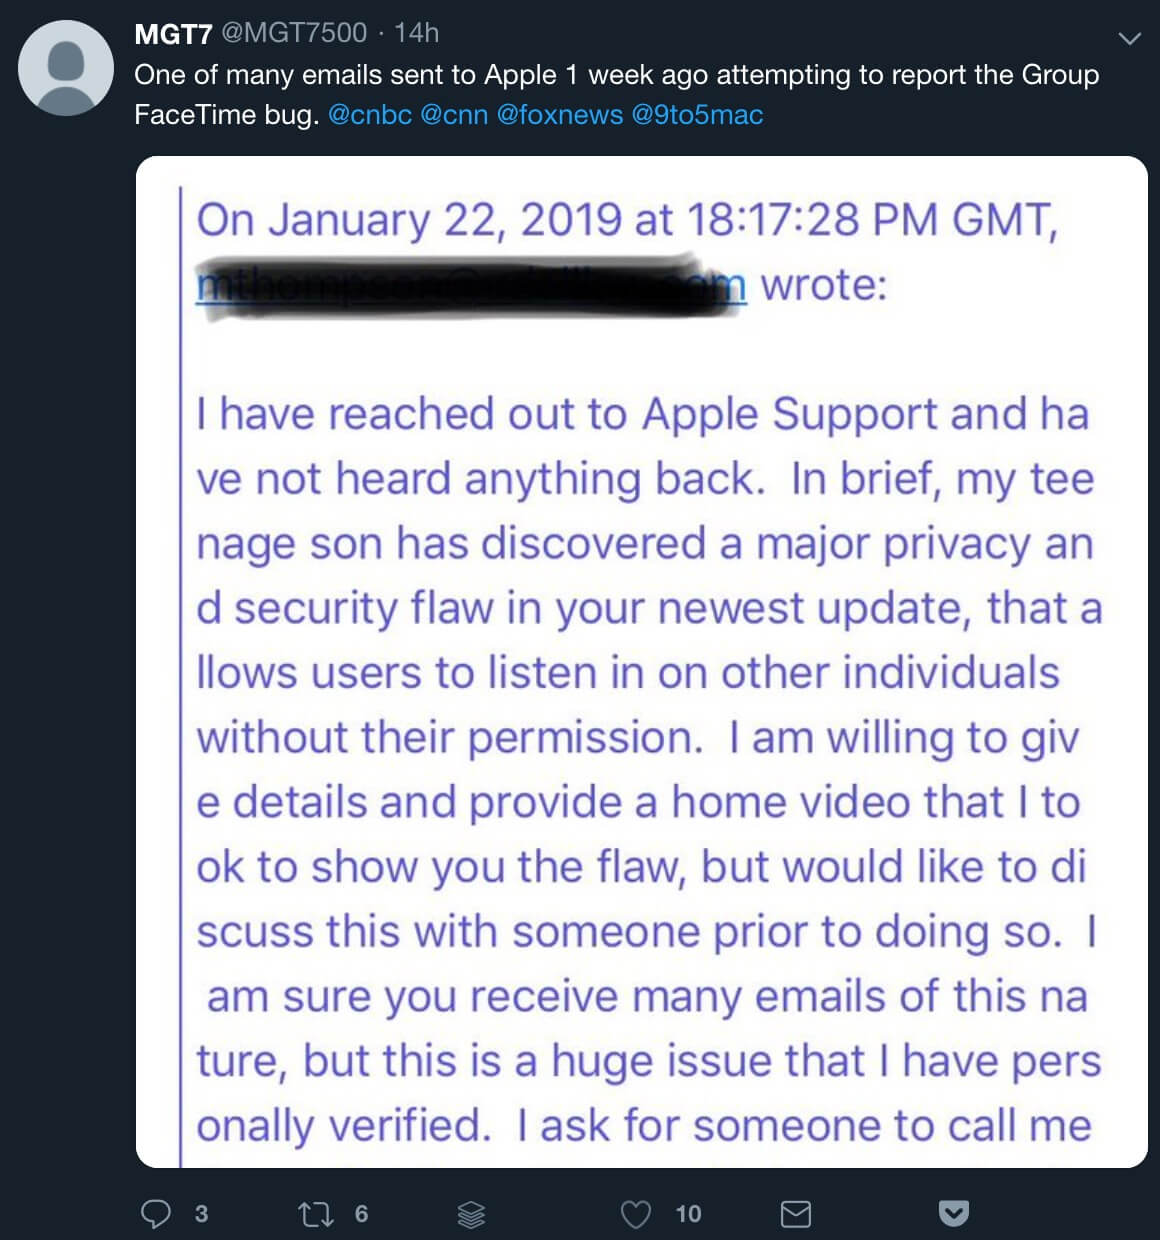 A tweet showing an email sent to Apple on January 22 asking to discuss the security flaw on a call.